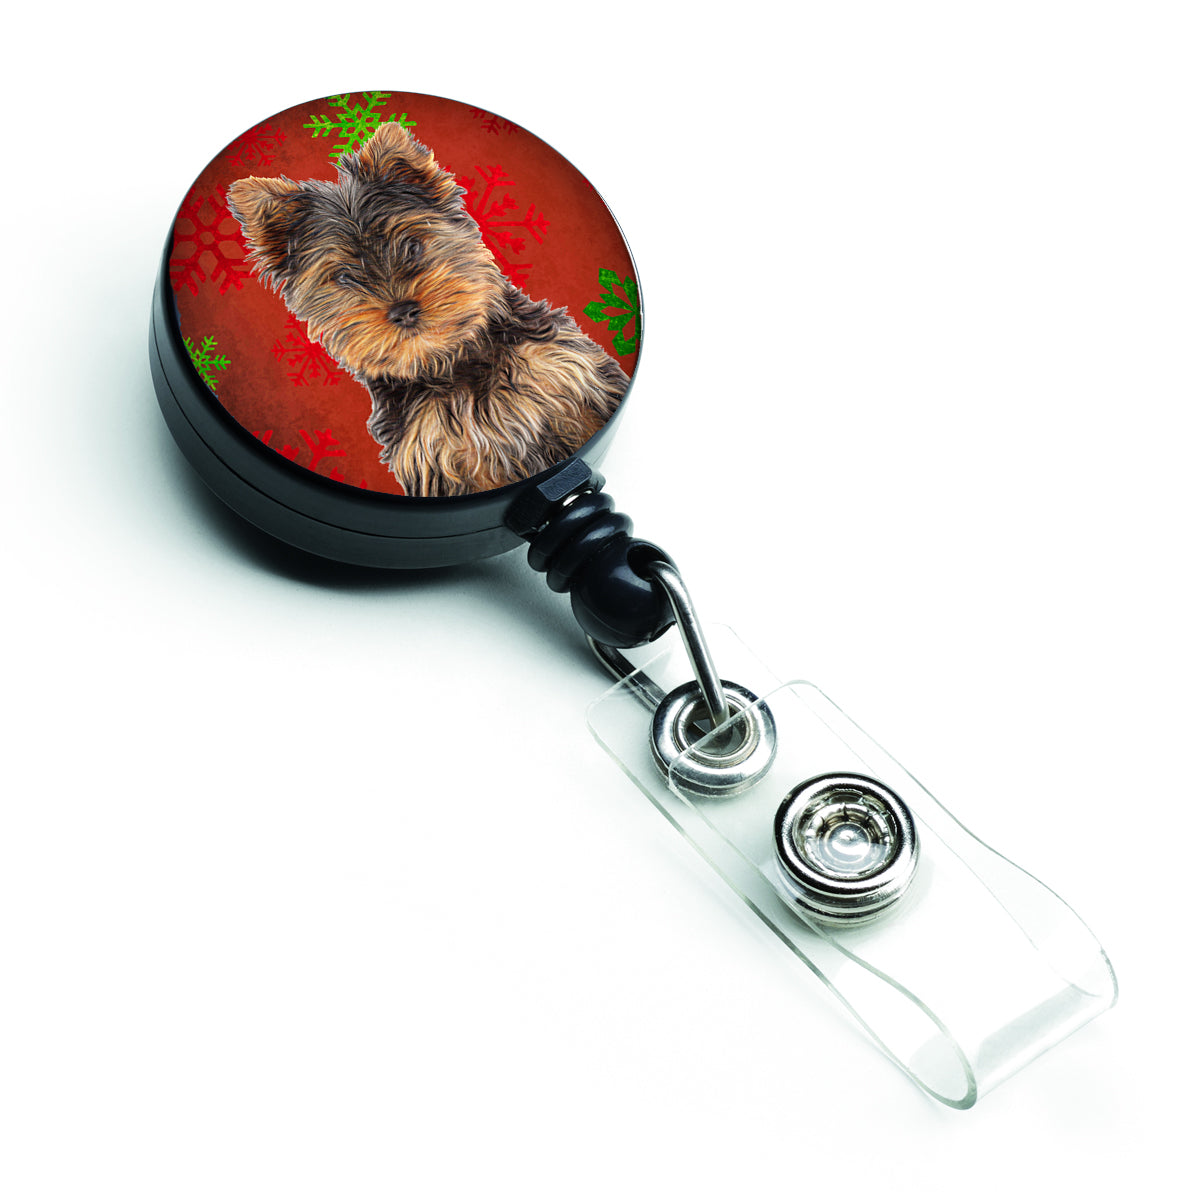 Red Snowflakes Holiday Christmas Yorkie Puppy / Yorkshire Terrier Retractable Badge Reel KJ1188BR.